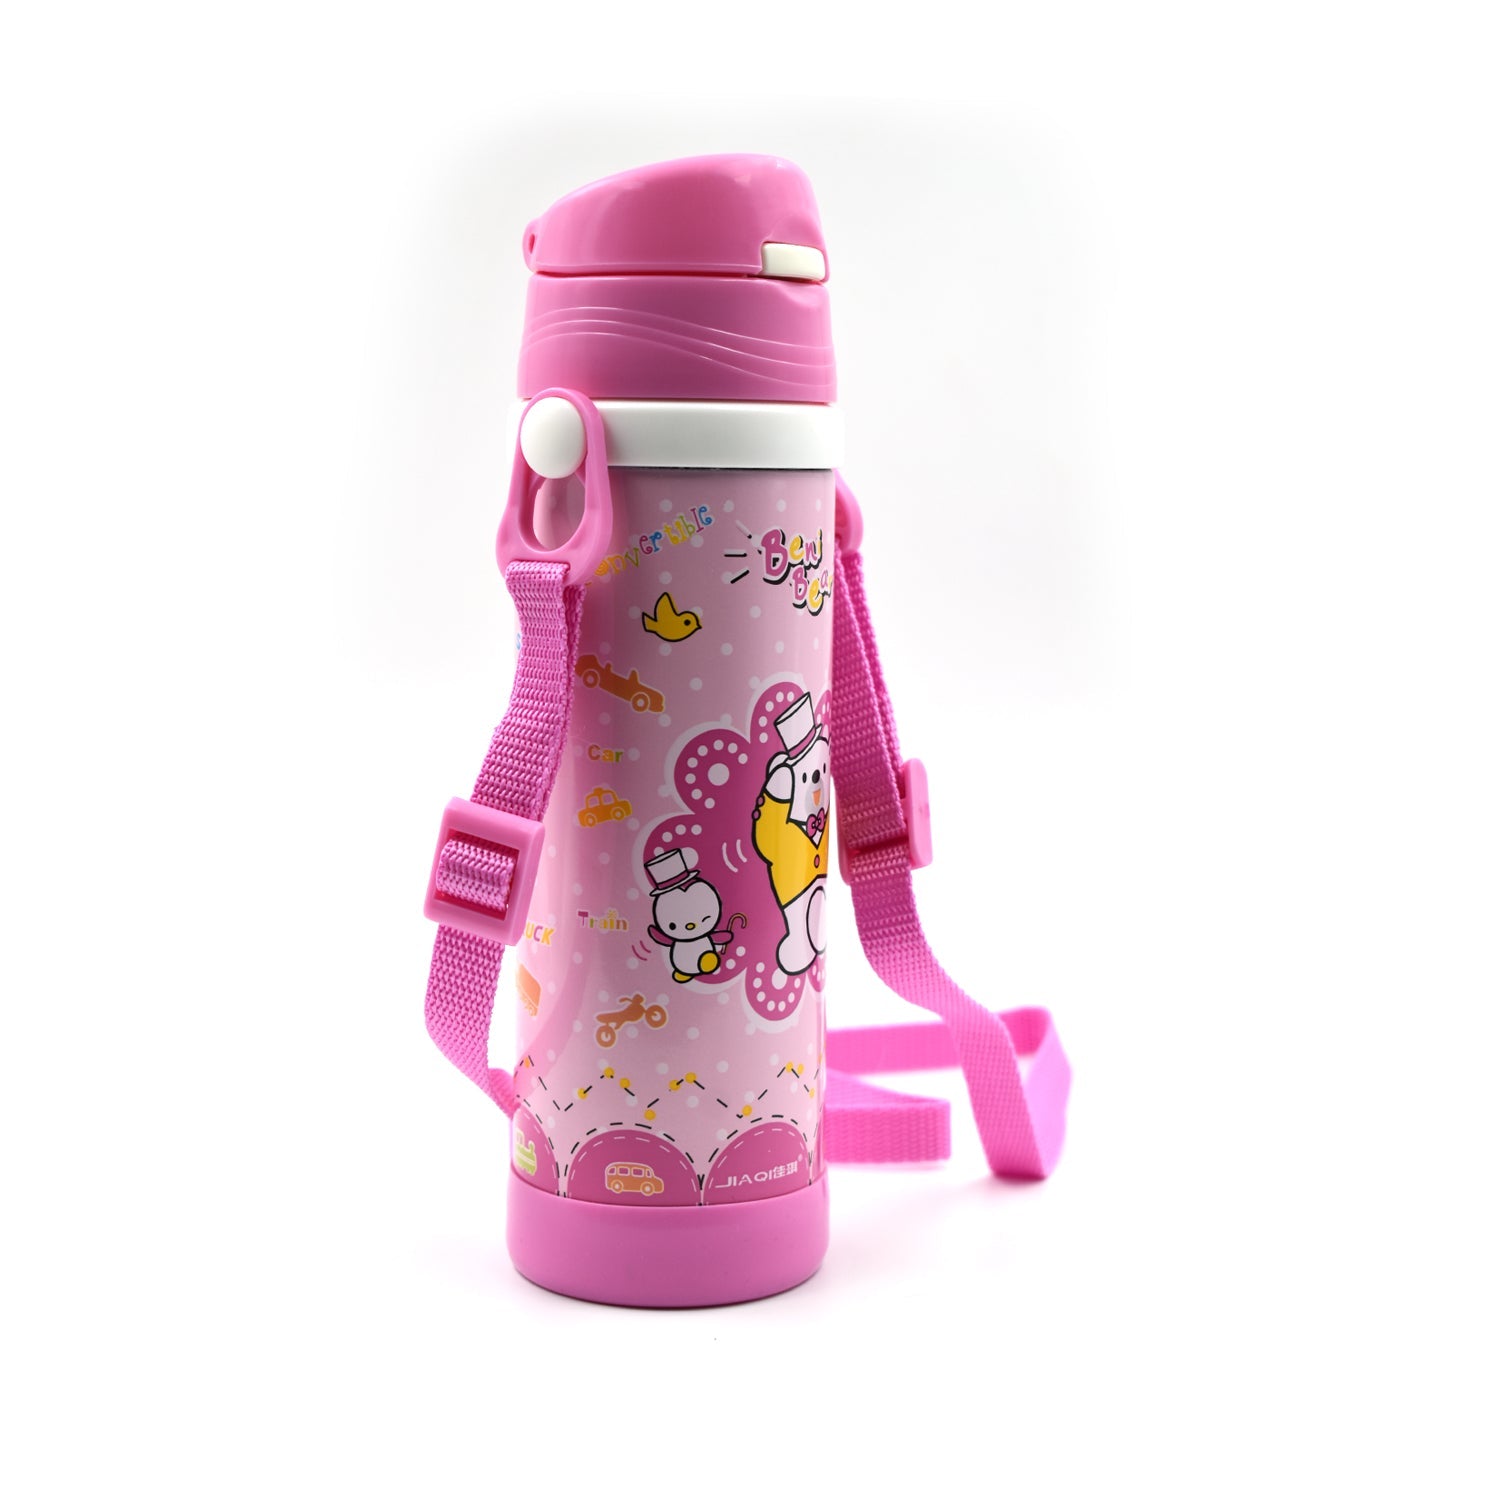 6419 Sport Bottle 500Ml Approx.. For Storing Water And Some Other Types Of Beverages Etc.